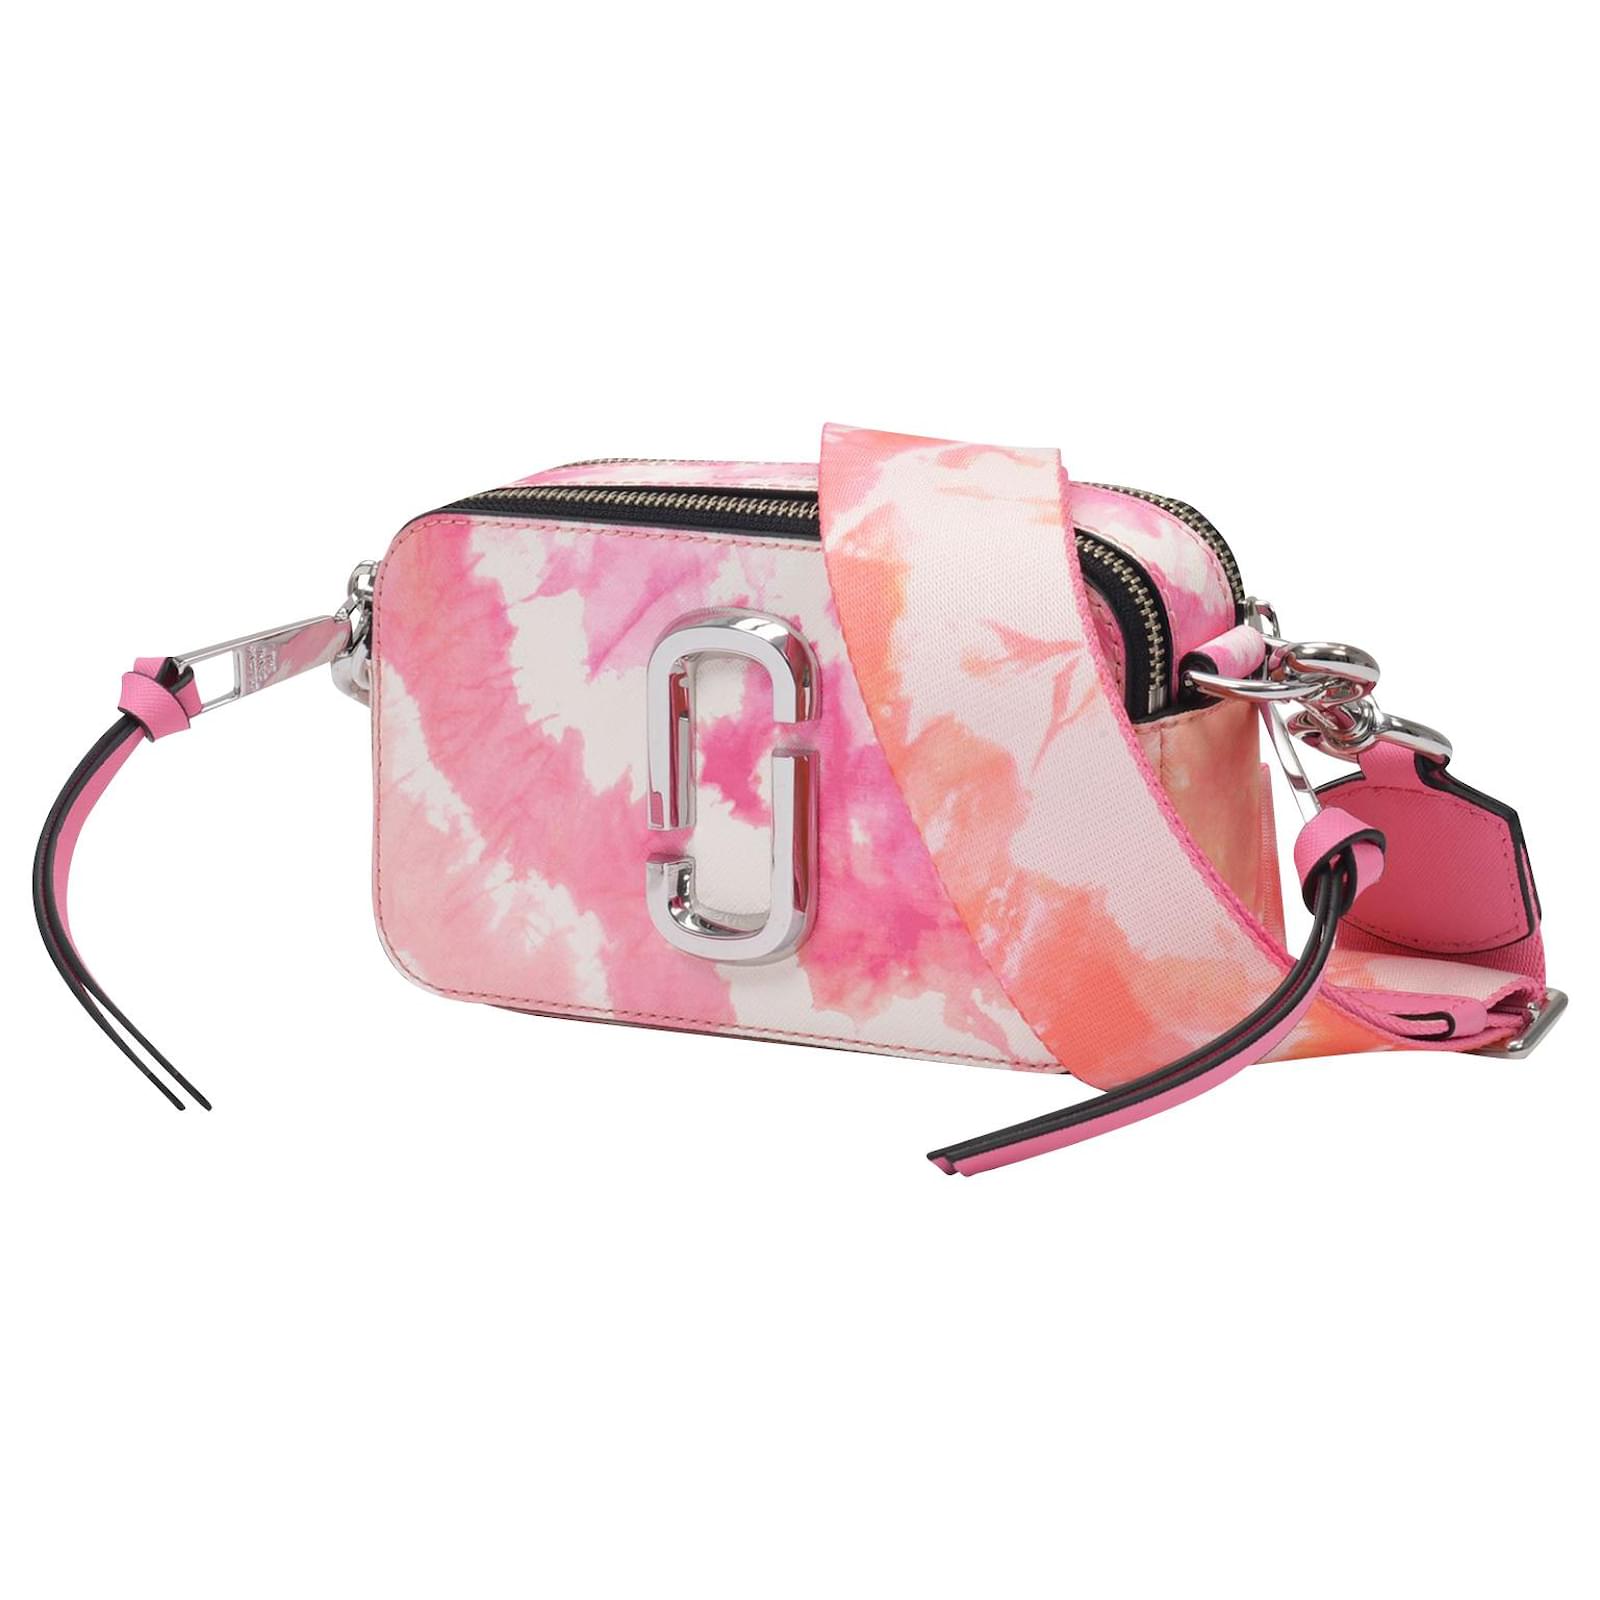 Snapshot of Marc Jacobs - Pink and beige rectangular leather bag with toile  print for women